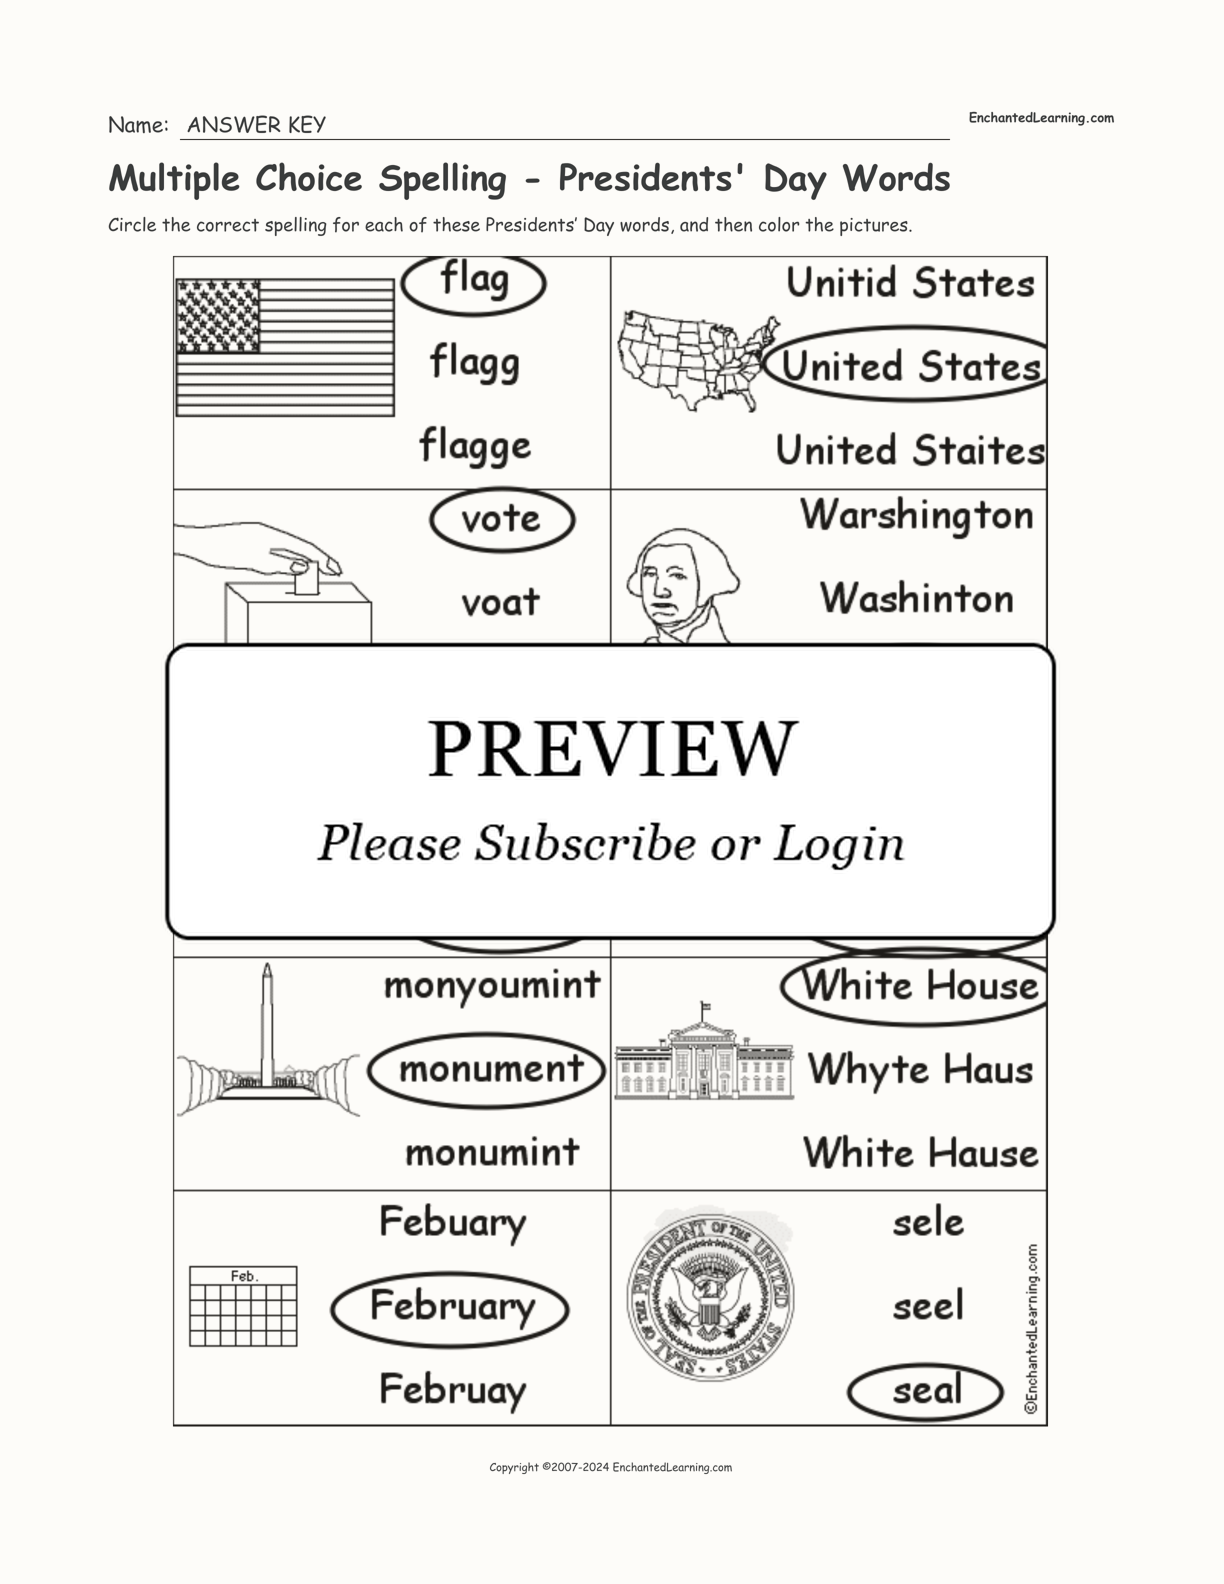 Multiple Choice Spelling -  Presidents' Day Words interactive worksheet page 2